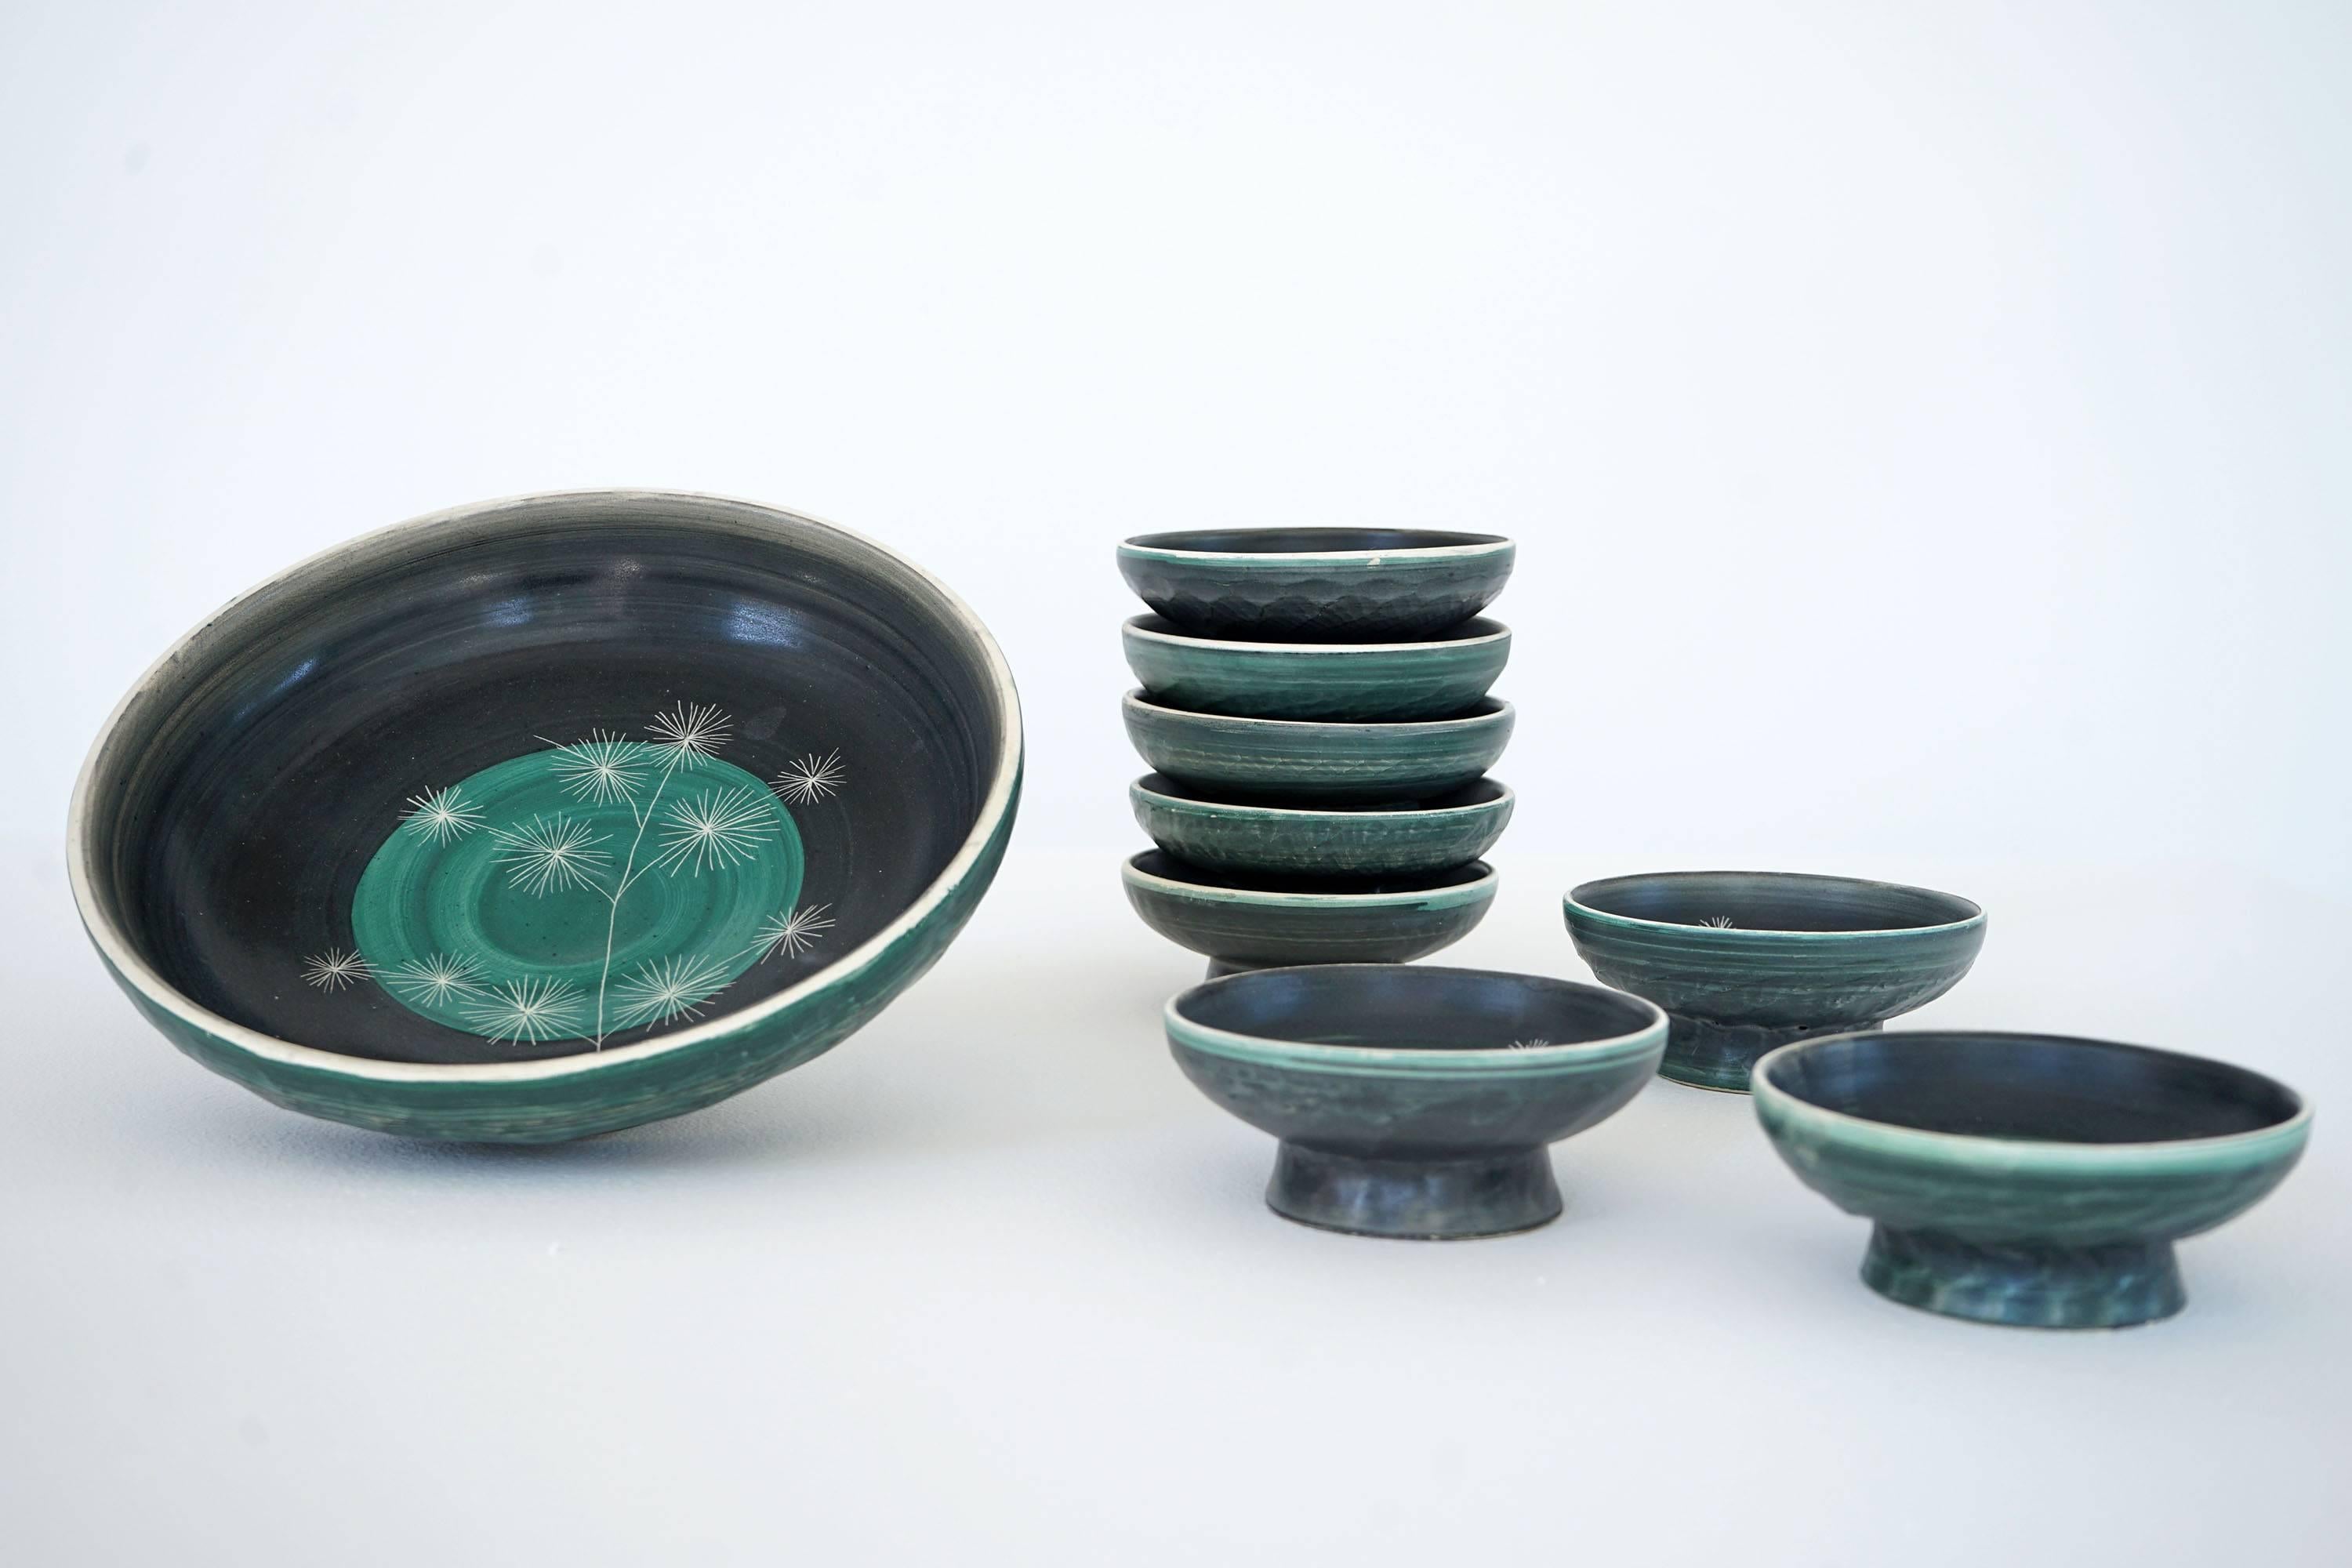 Mid-20th Century Set of Handmade Ceramic Bowls by Tapis Vert in Vallauris, 1950s For Sale